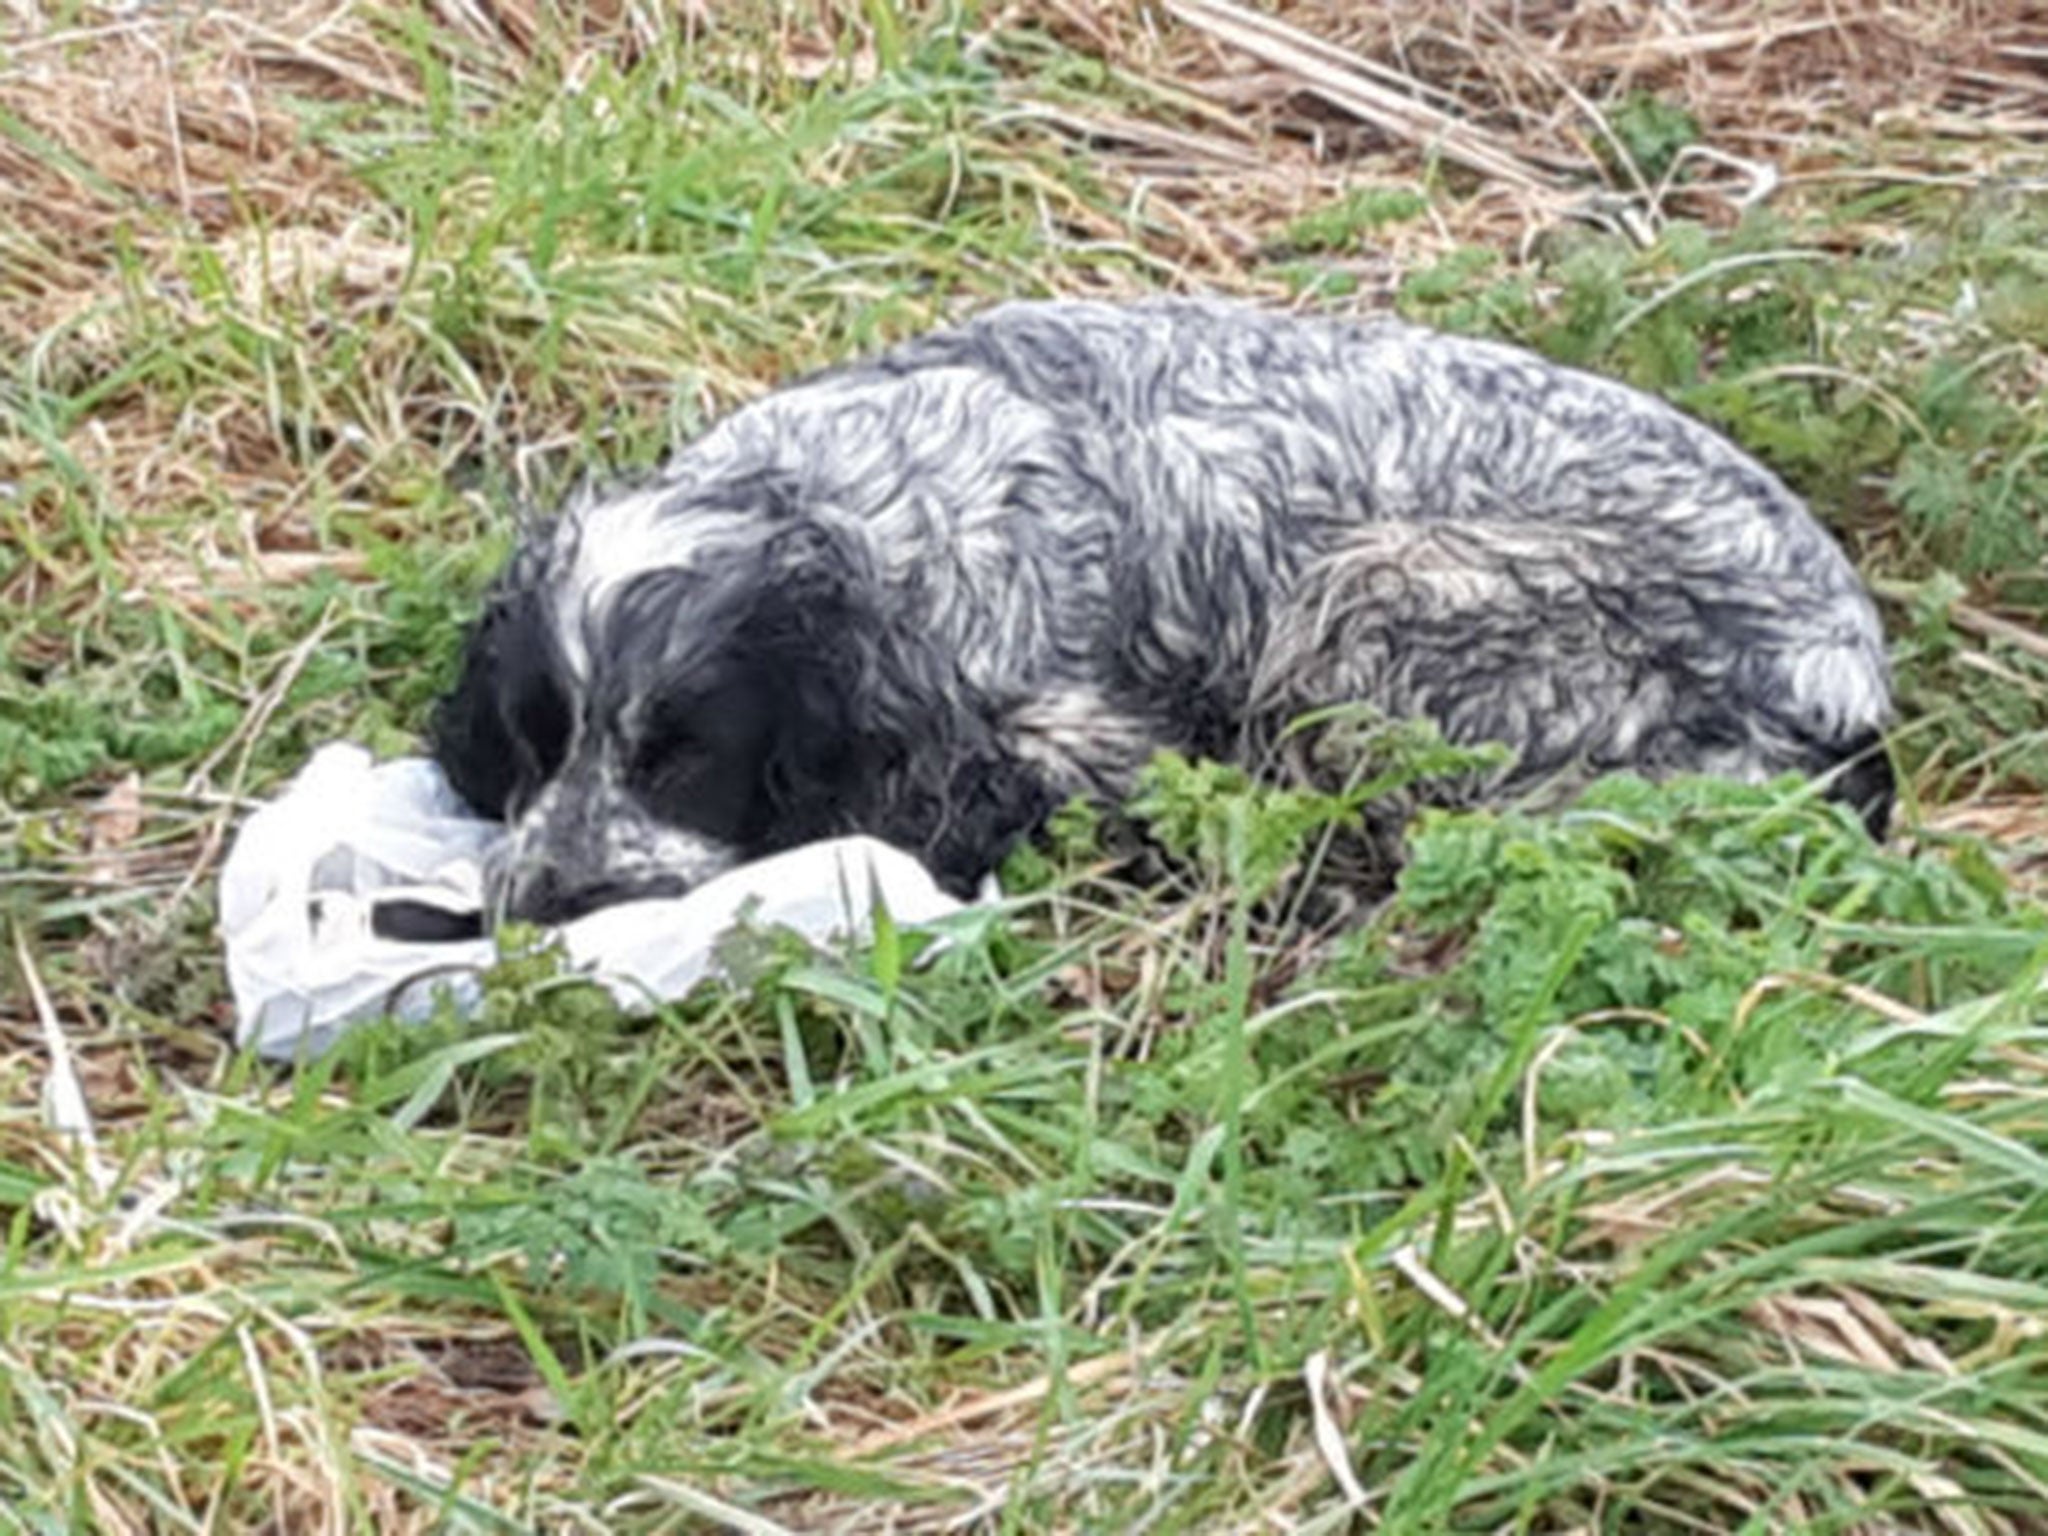 The spaniel was found along with her dead puppies in a chip shop bag